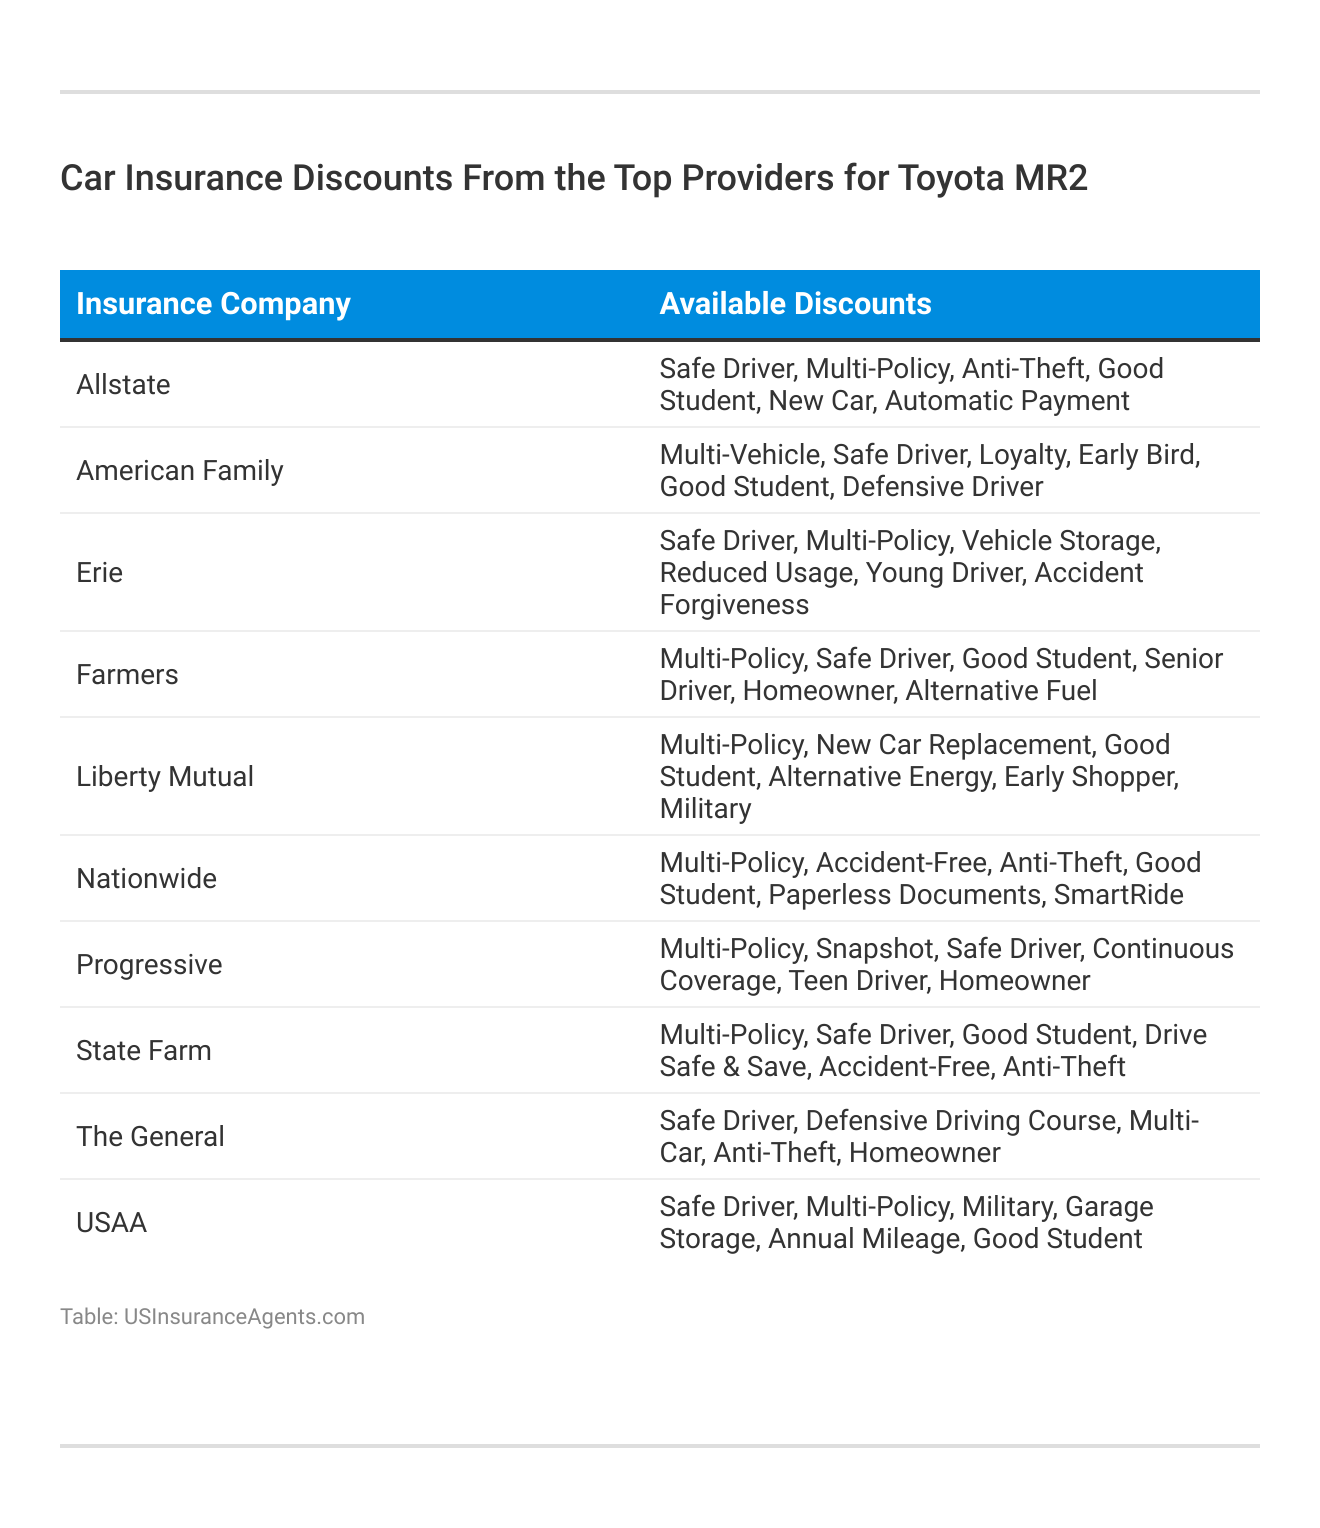 <h3>Car Insurance Discounts From the Top Providers for Toyota MR2</h3>